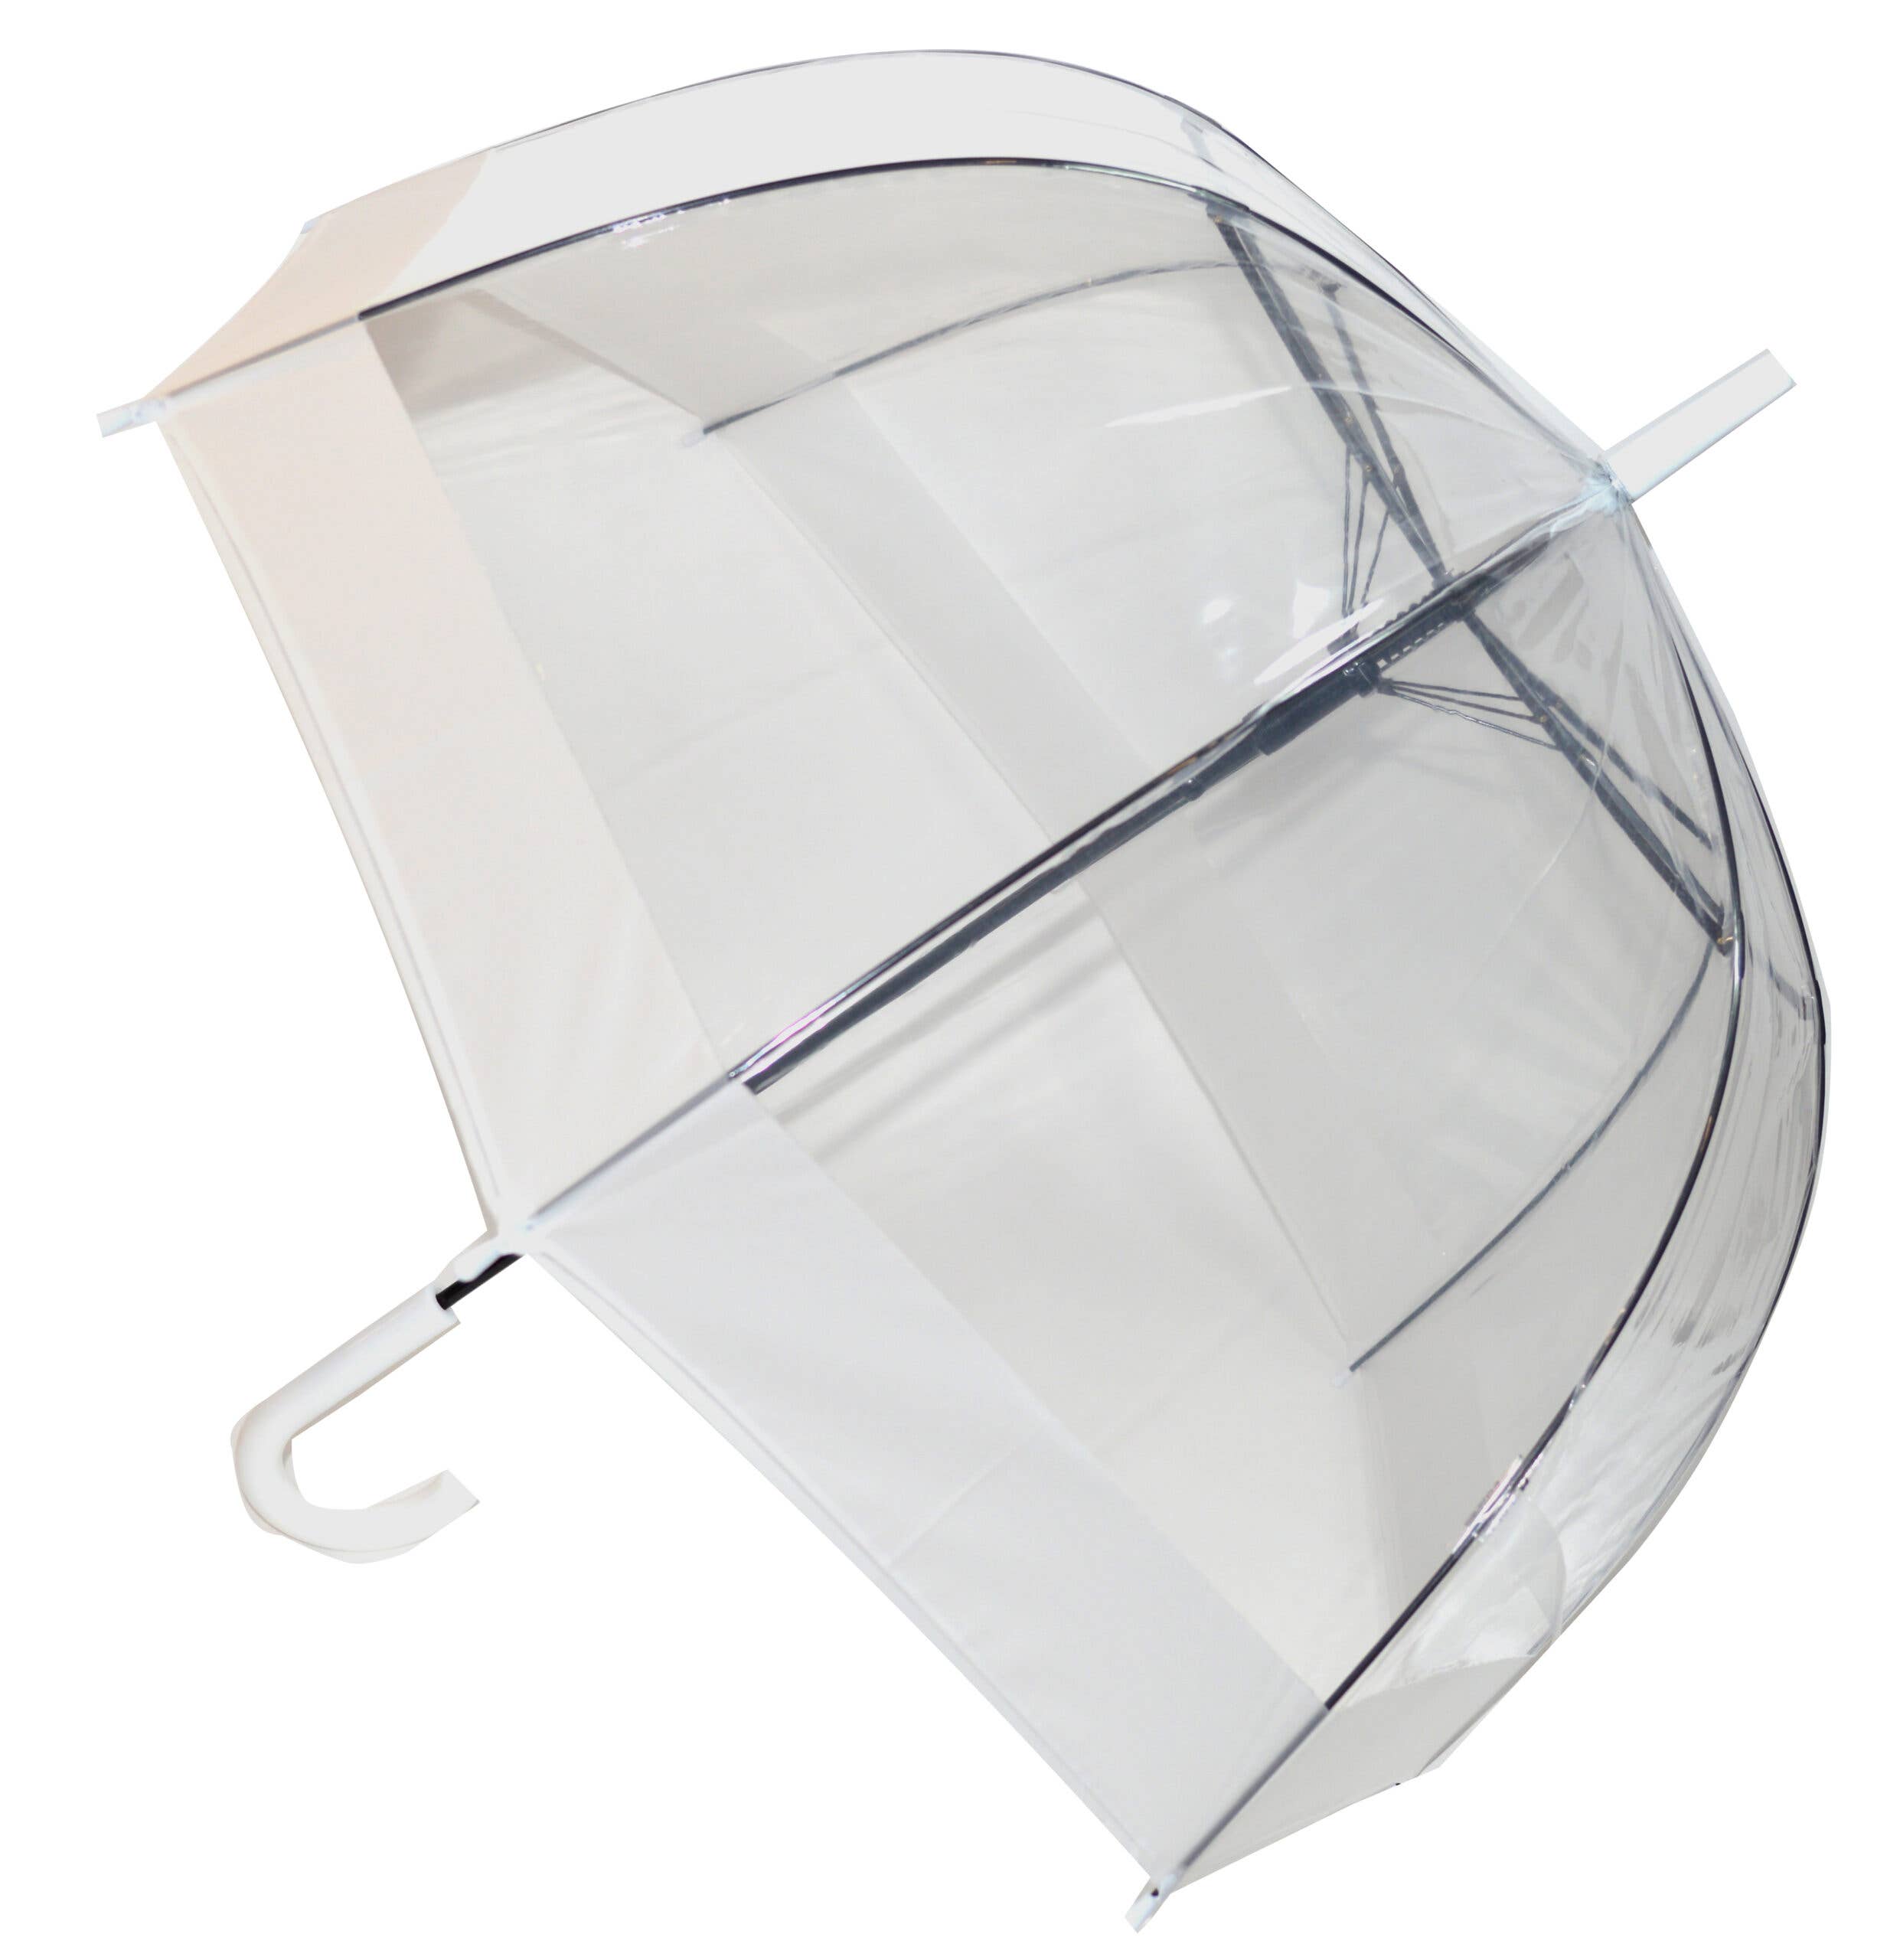 Everyday Walking Stick Style Clear Dome Umbrella with White